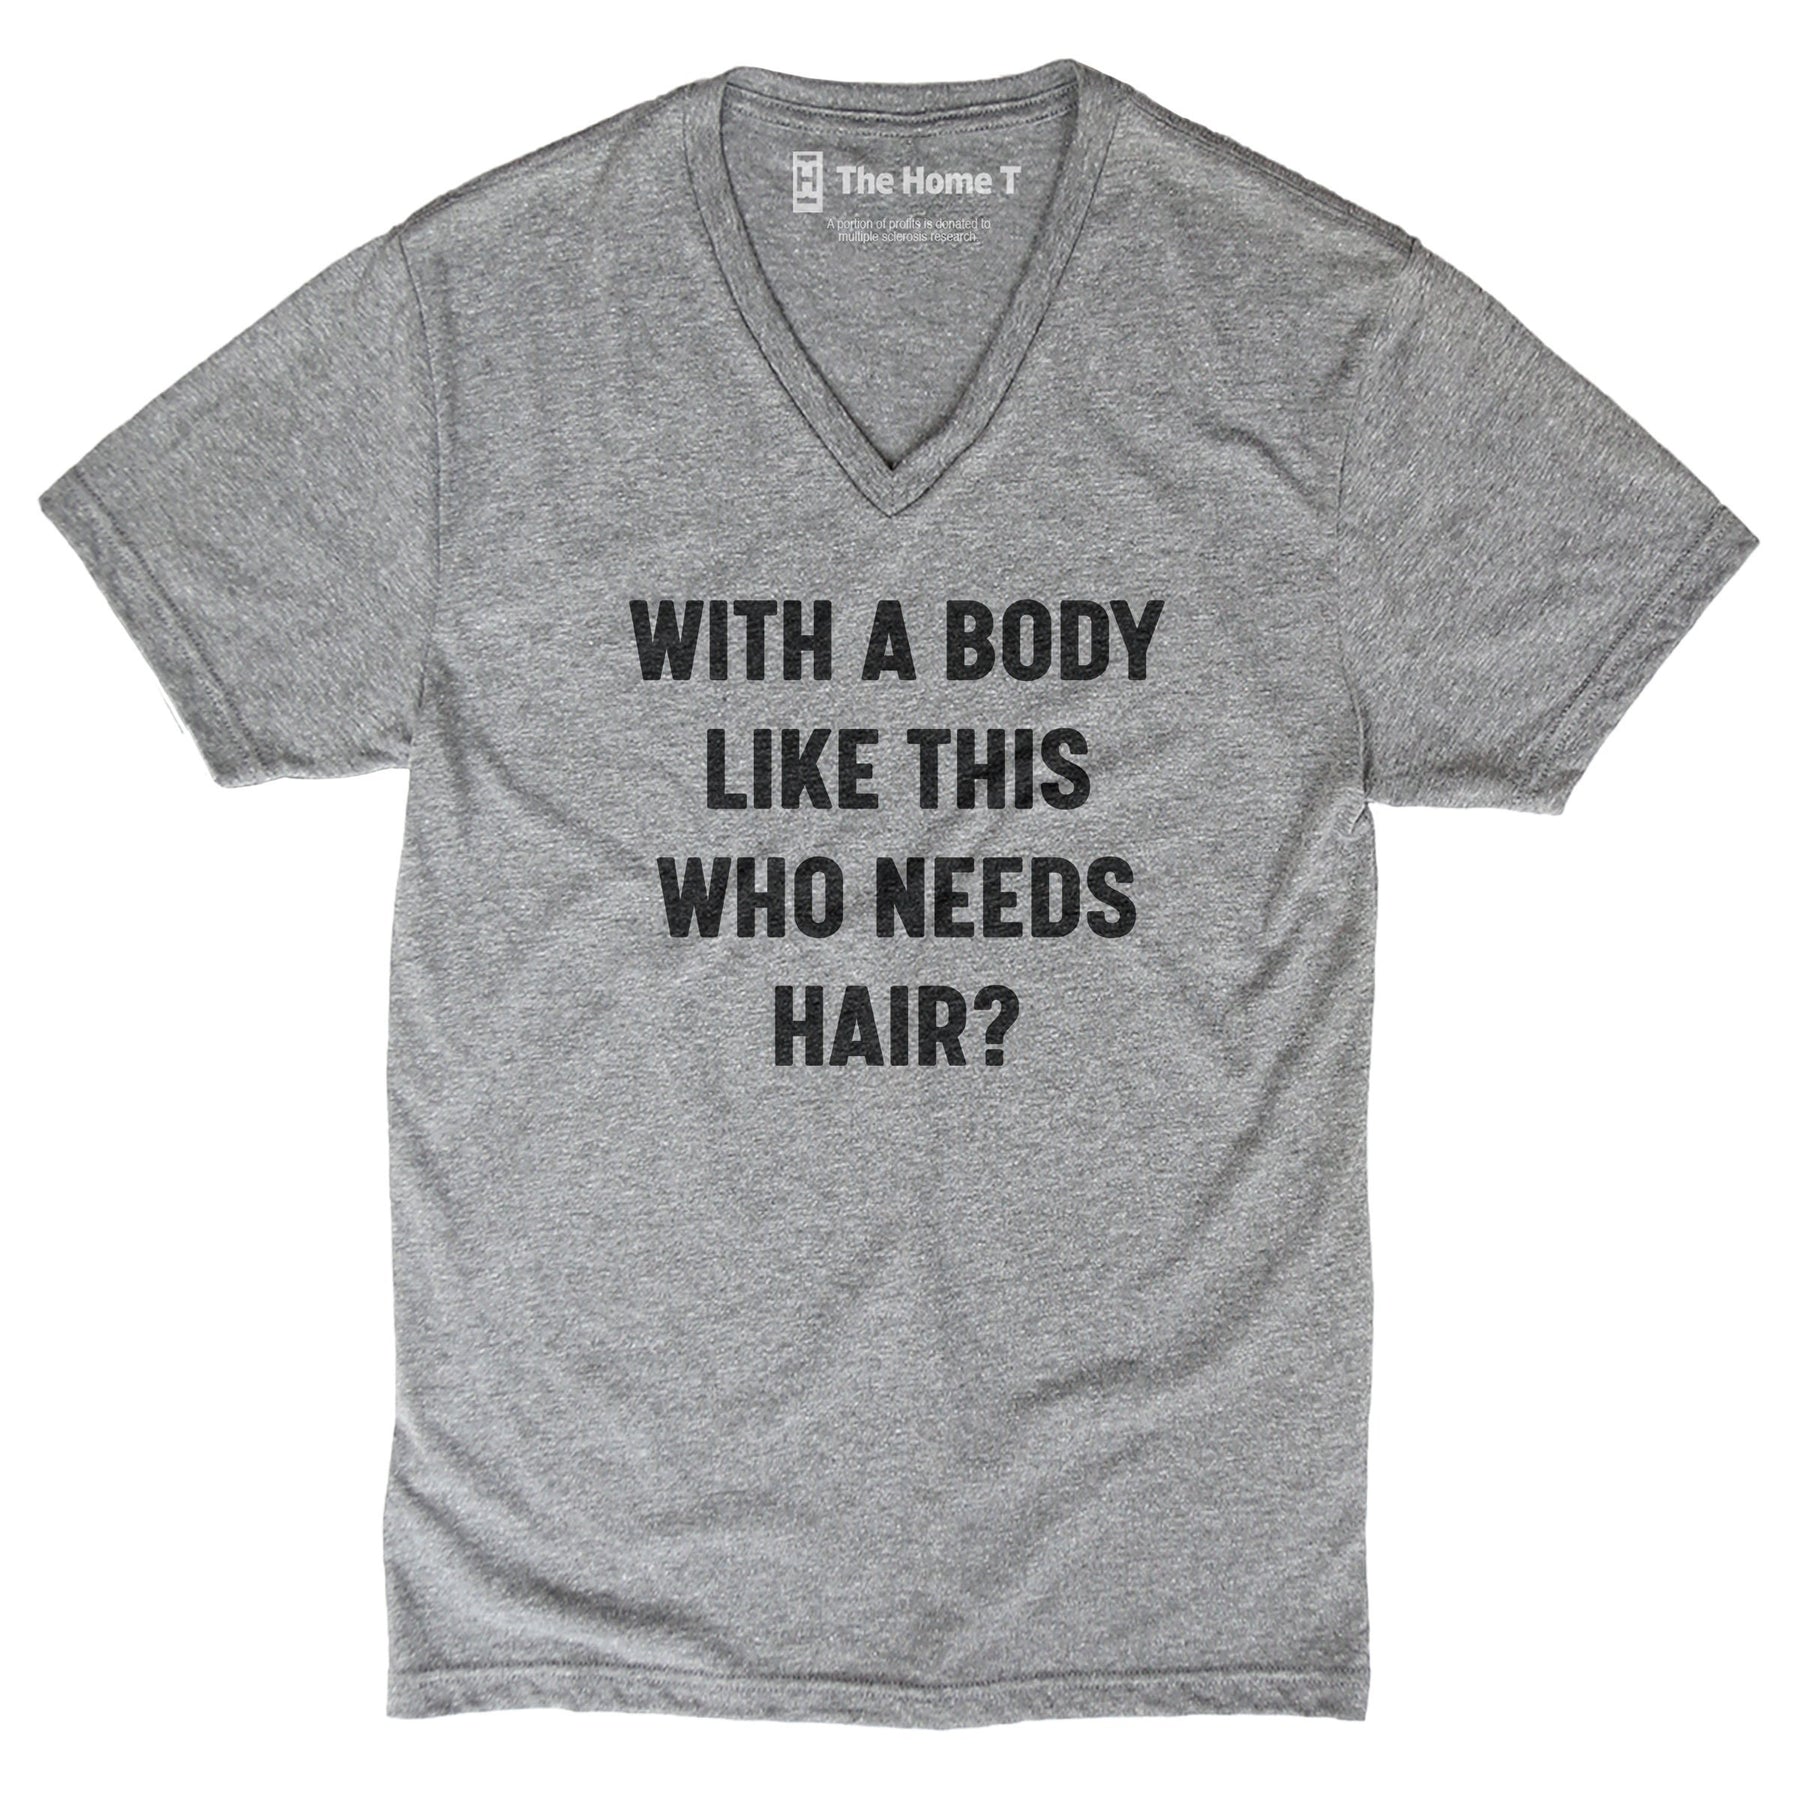 With a Body Like This Who Needs Hair? The Home T XS V-neck